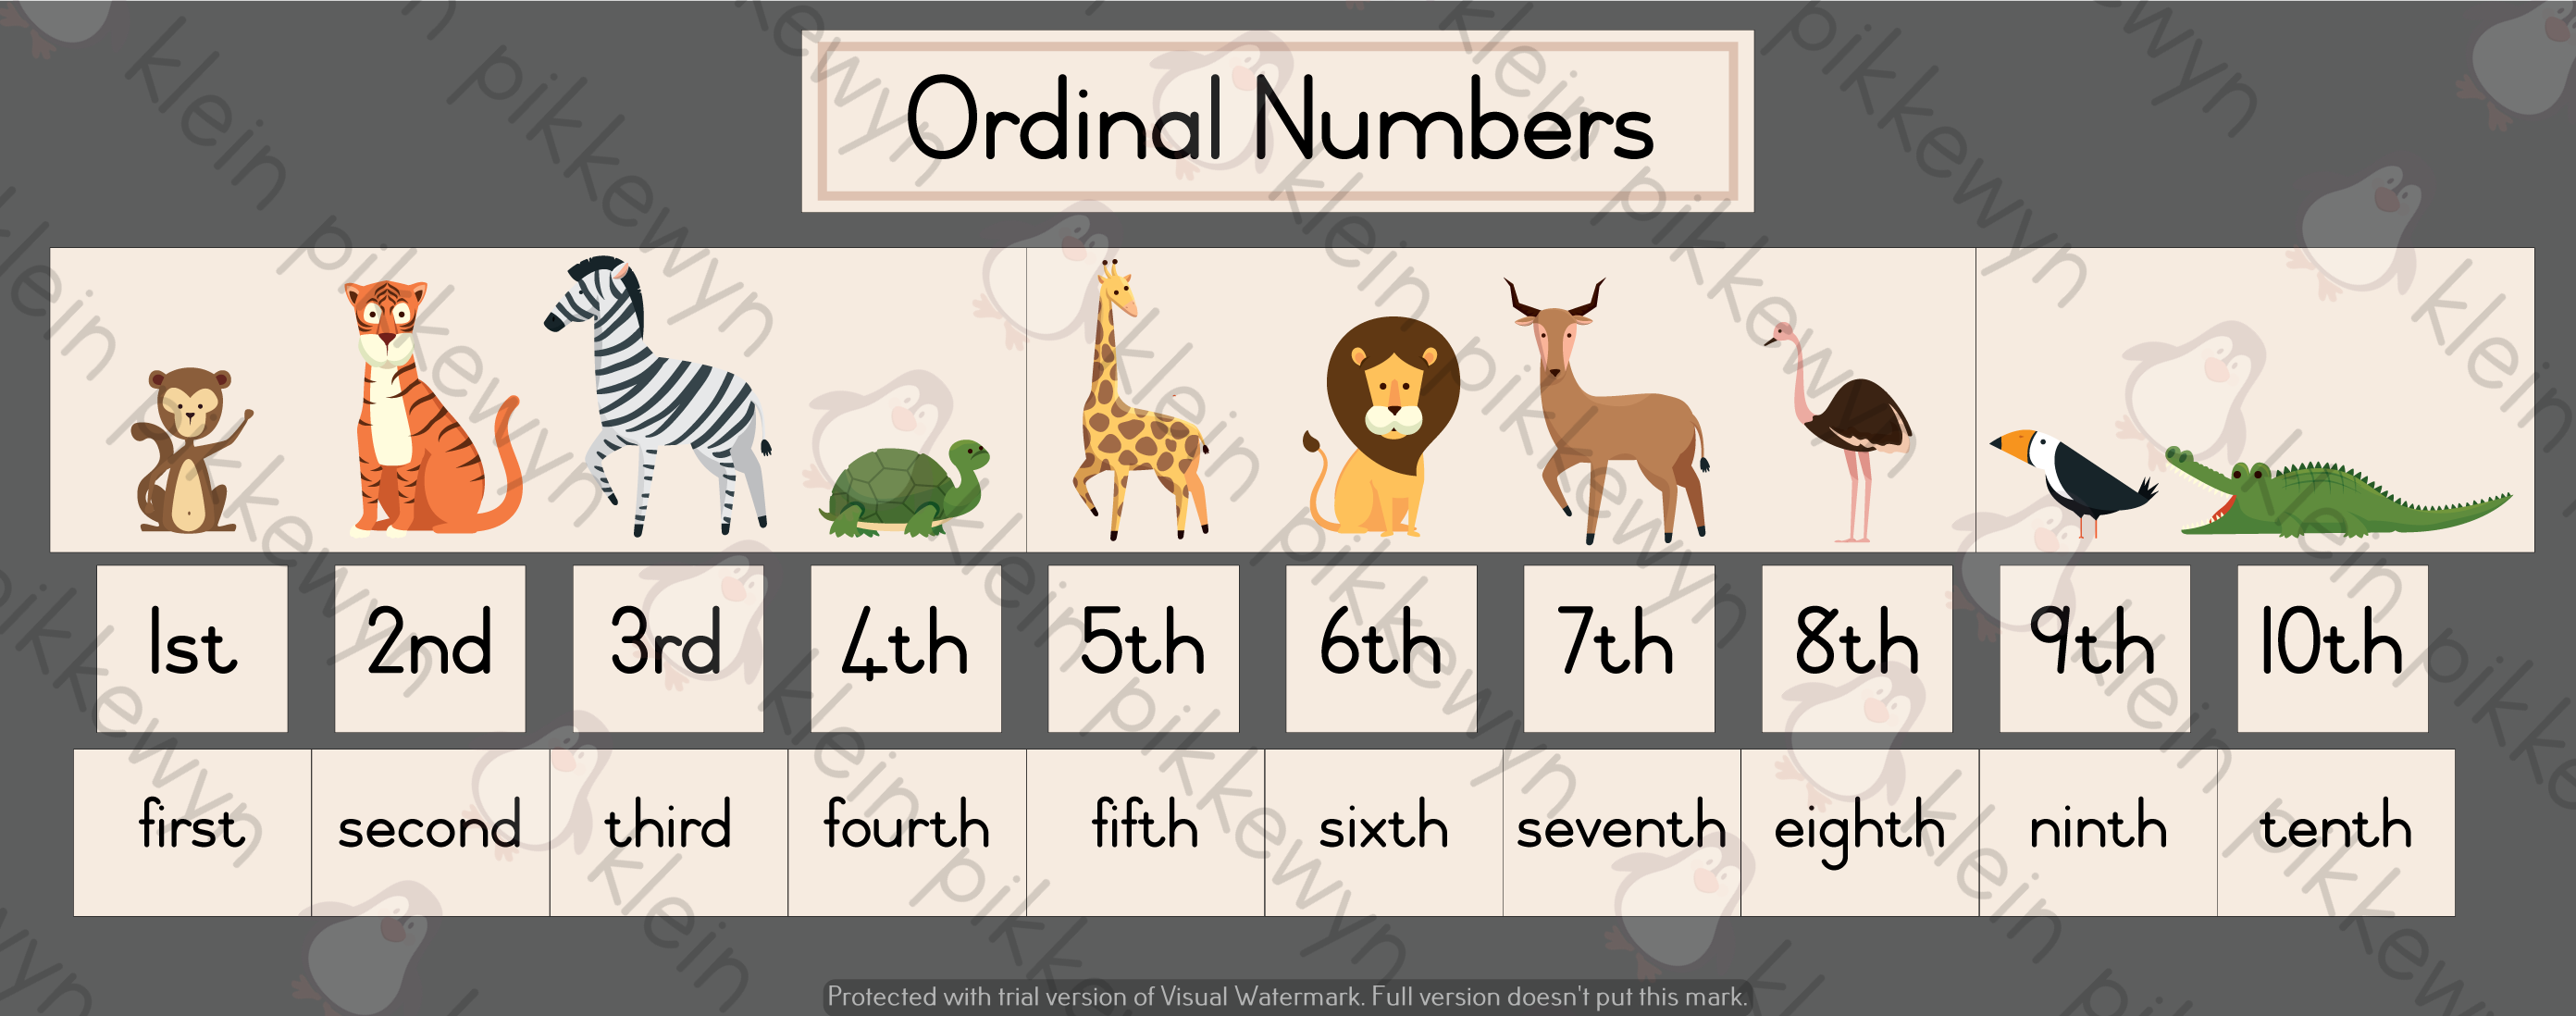 free-printable-english-ordinal-numbers-worksheets-for-your-child-24-36-ordinal-numbers